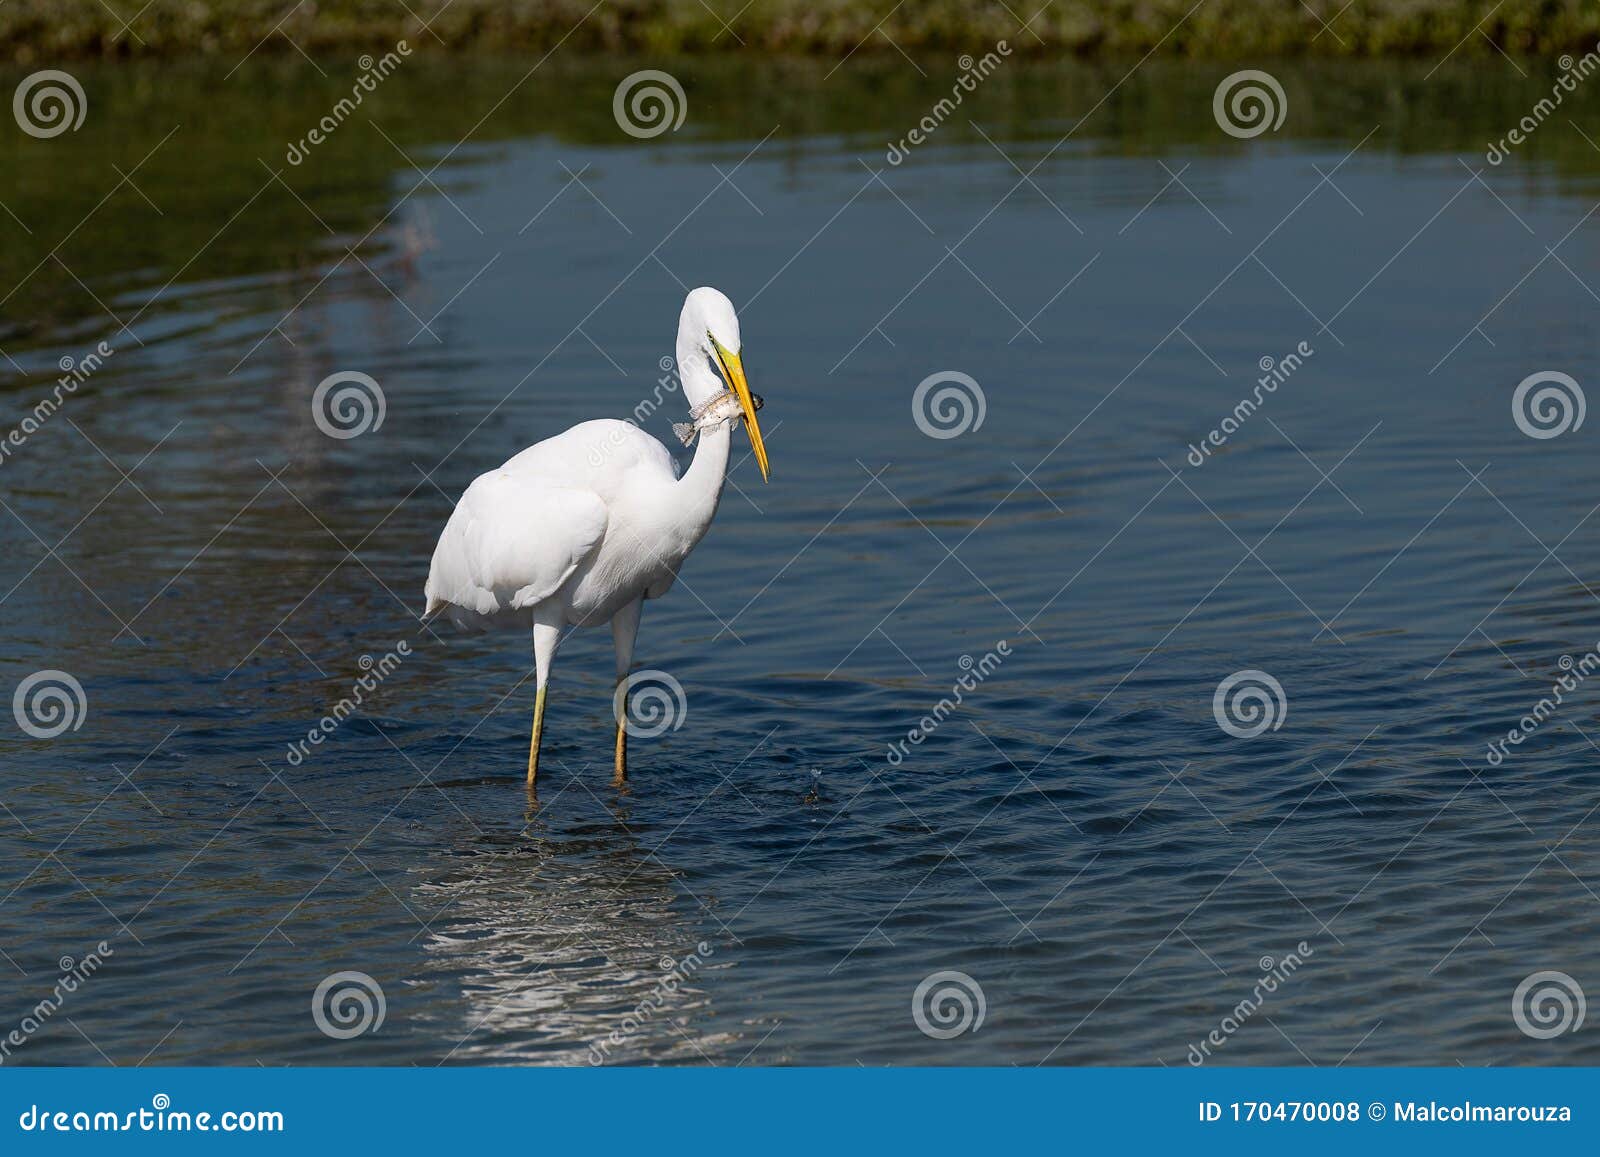 a large great egret ardea alba, with a fresh catch.